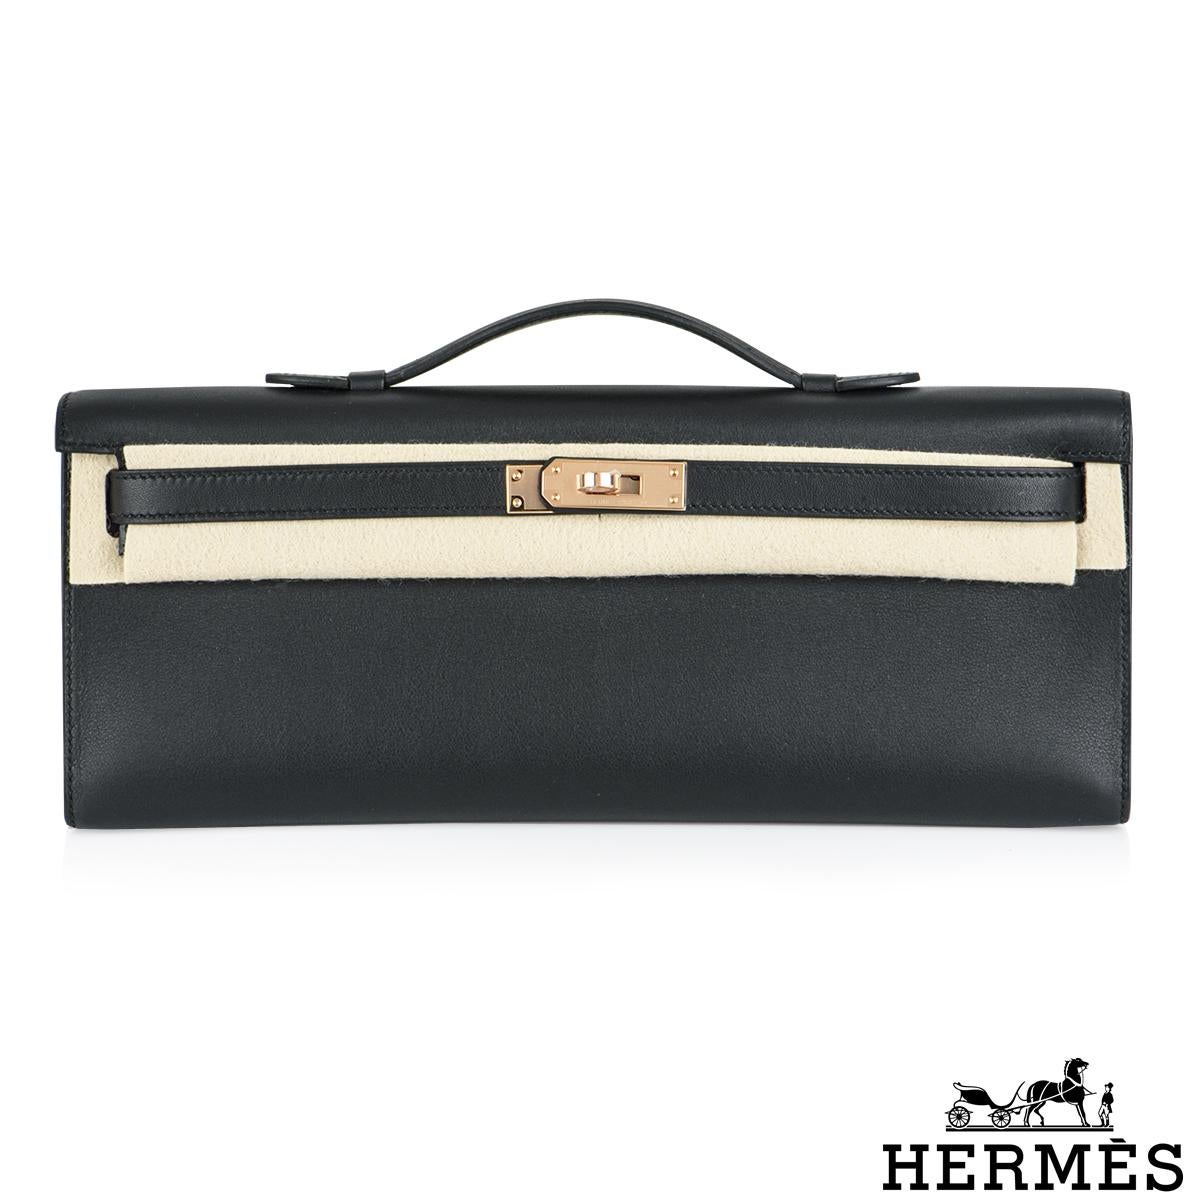 A chic Black Hermes Kelly Cut Clutch with rare Rose Gold Hardware. The exterior of this Kelly Cut features black veau swift leather with tonal stitching. It is complemented with rose gold tone hardware with front toggle closure and a top handle. The